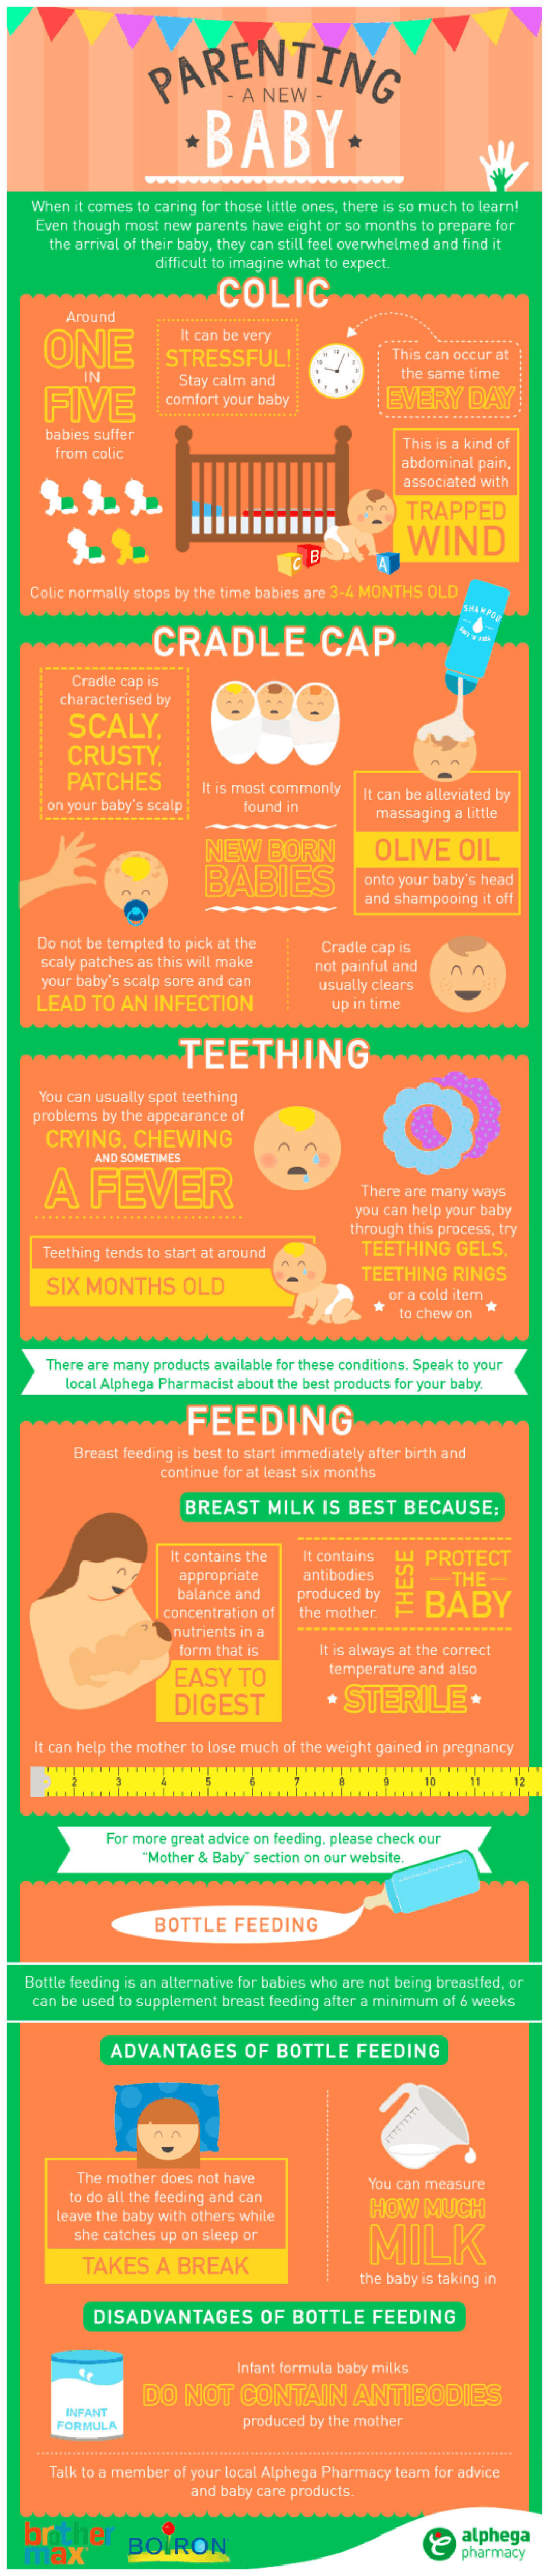 Common Illnesses in Babies - Parenting Infographic